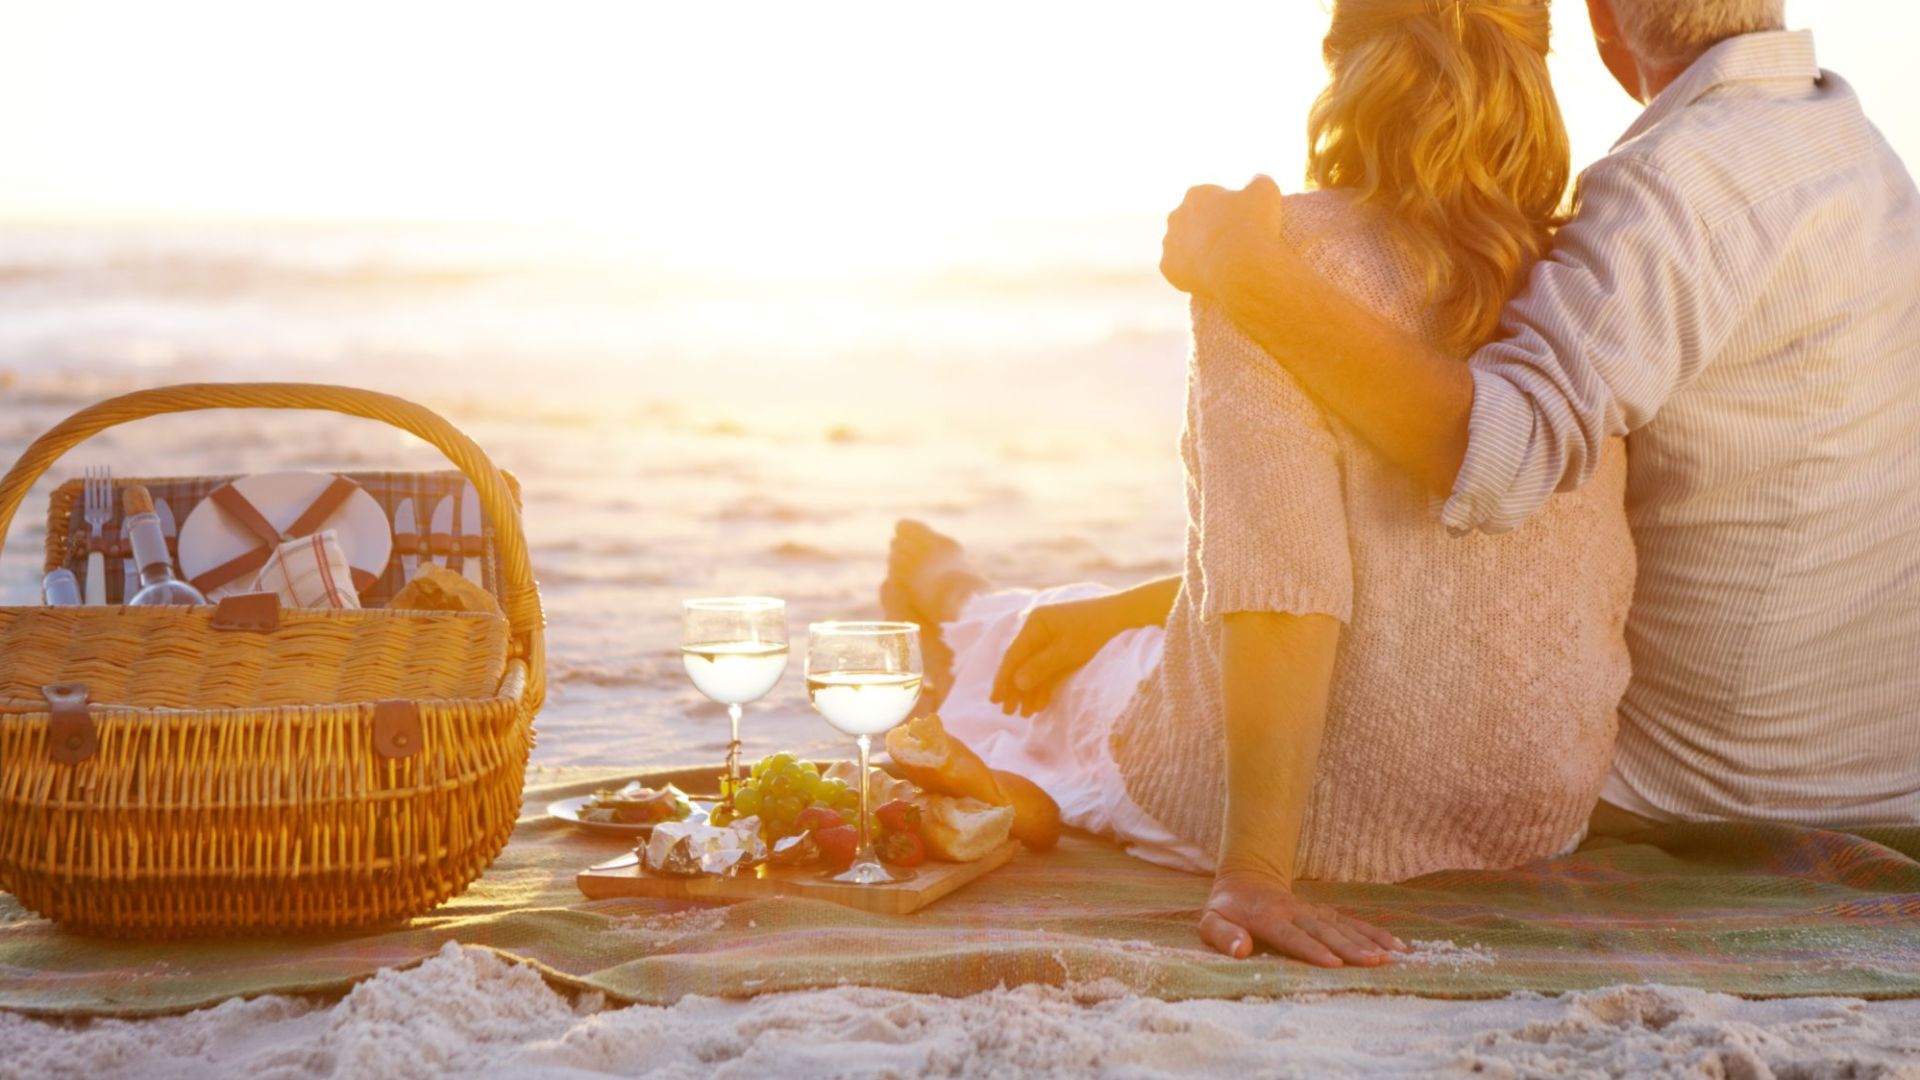 A Man And Woman Sitting On A Beach With A Basket Of Wine